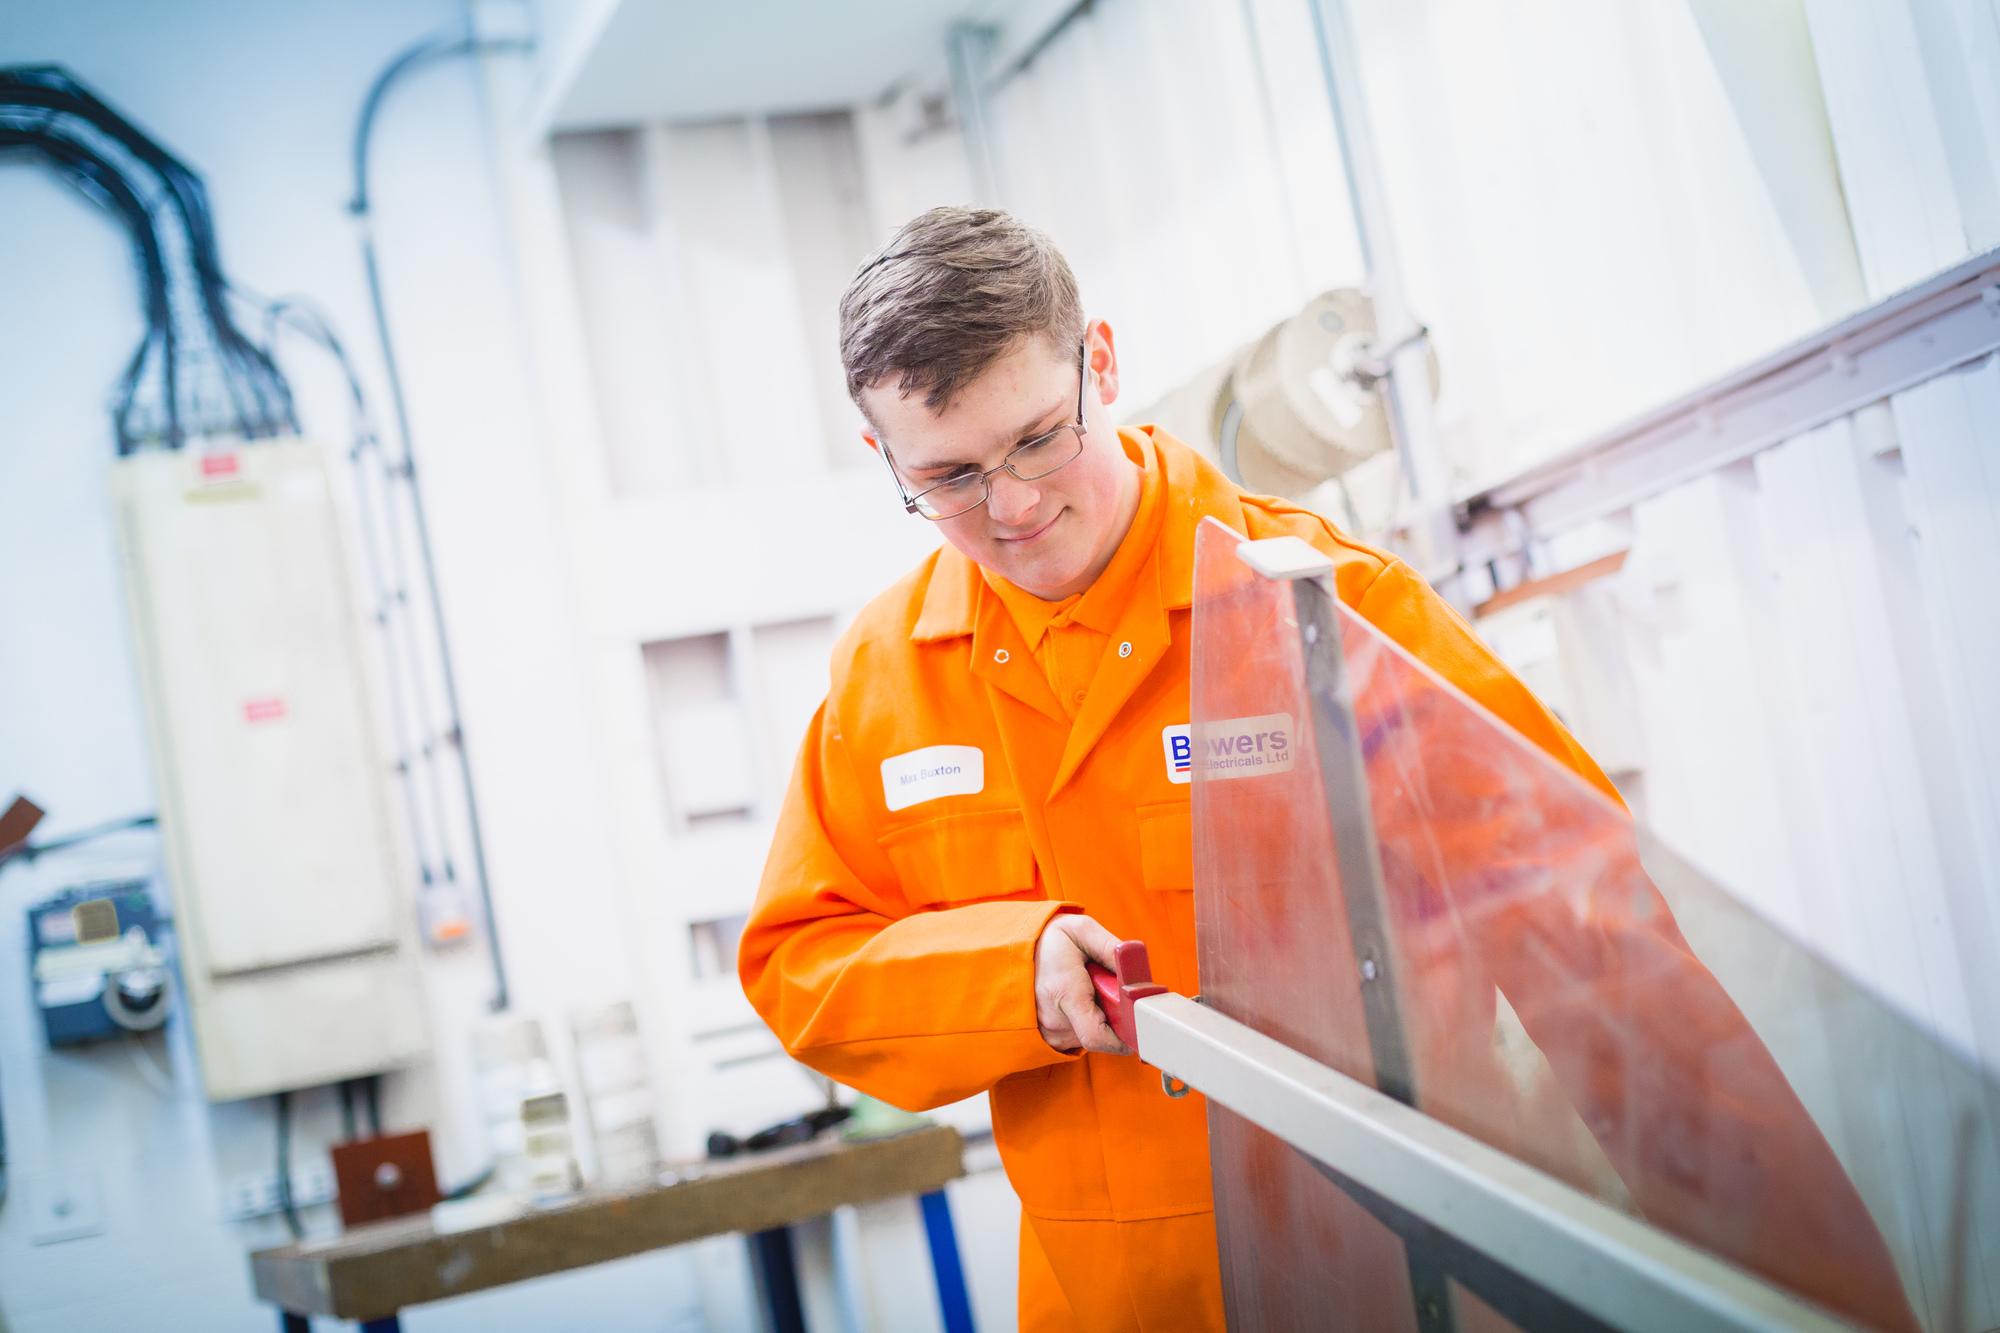 A young man in an orange jumpsuit works at his engineering apprenticeship.